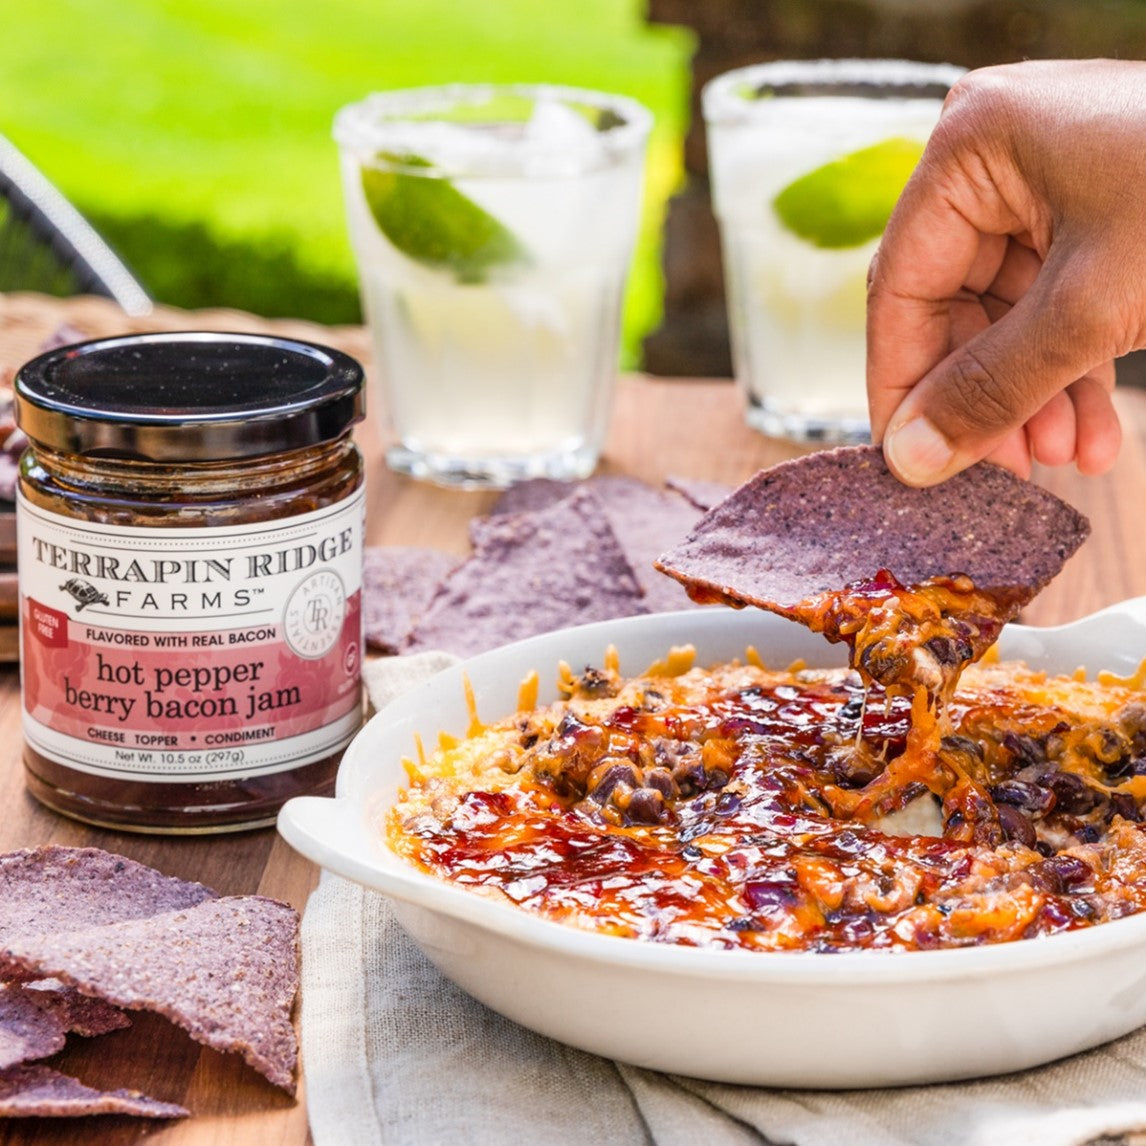 Southwest Dip with Hot Pepper Berry Bacon Jam